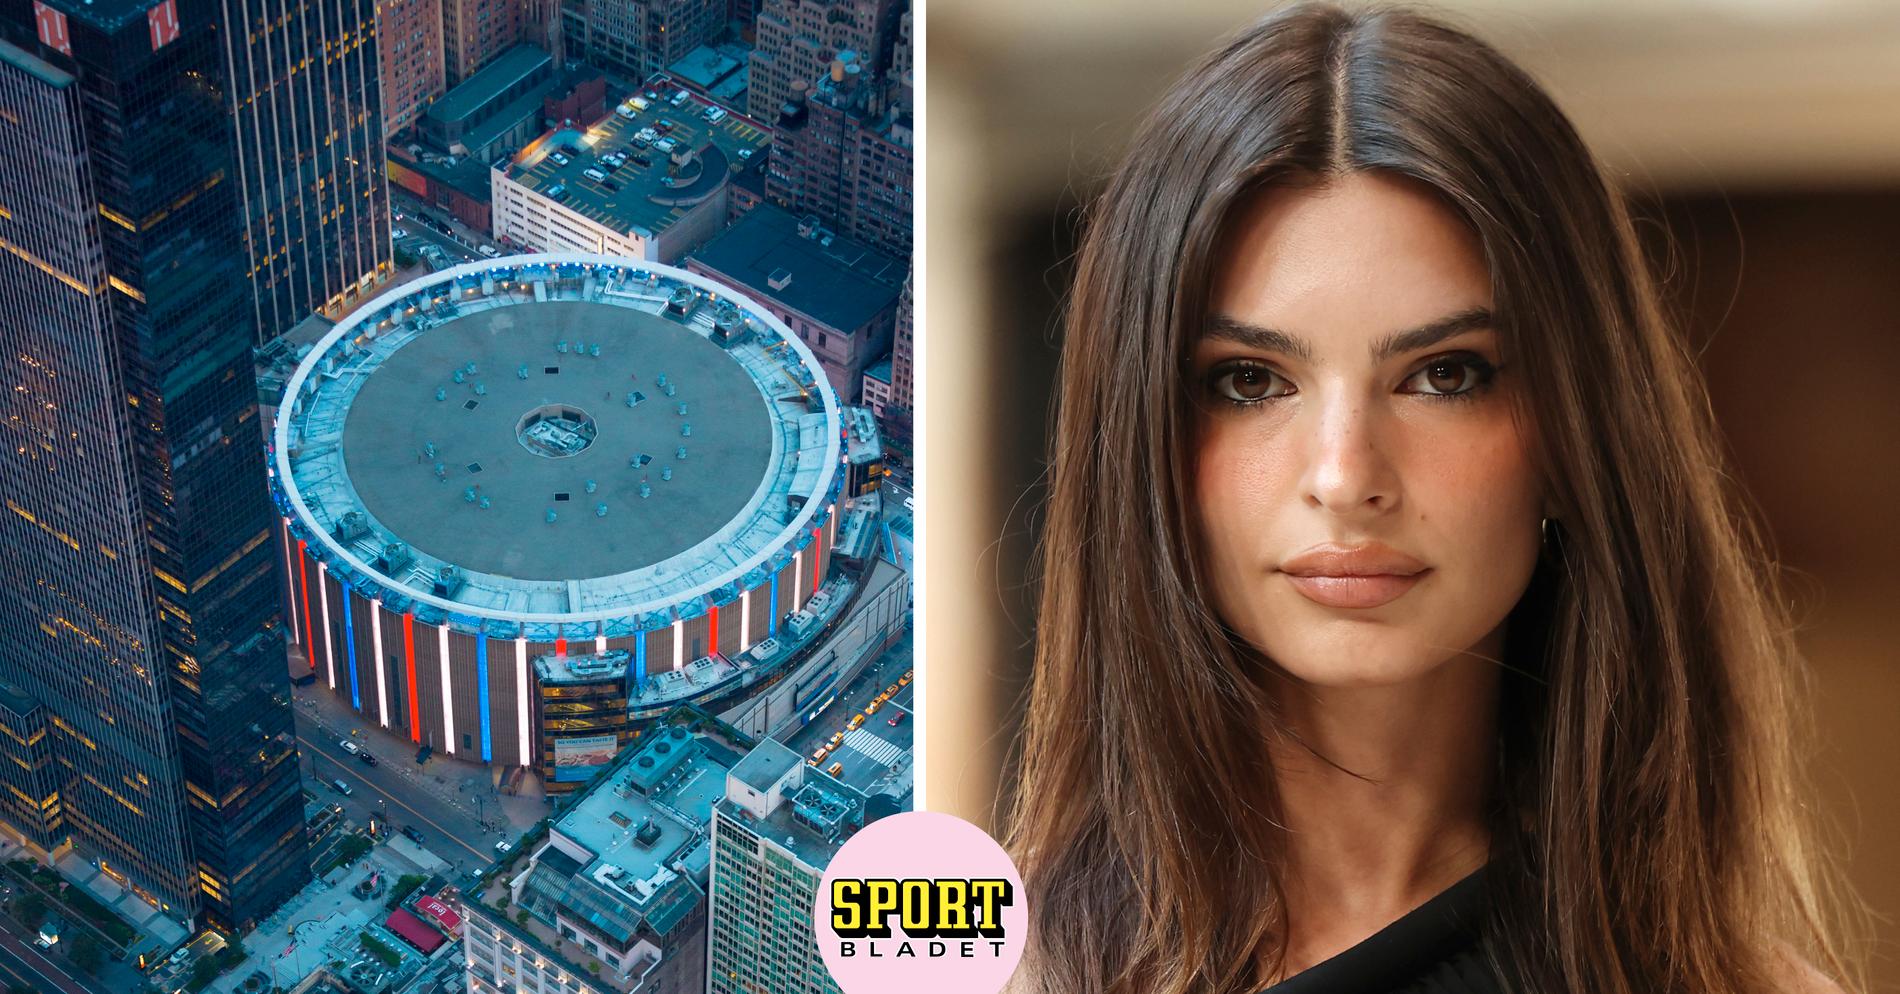 Emily Ratajkowski Denied VIP Seats at Madison Square Garden After Early Exit